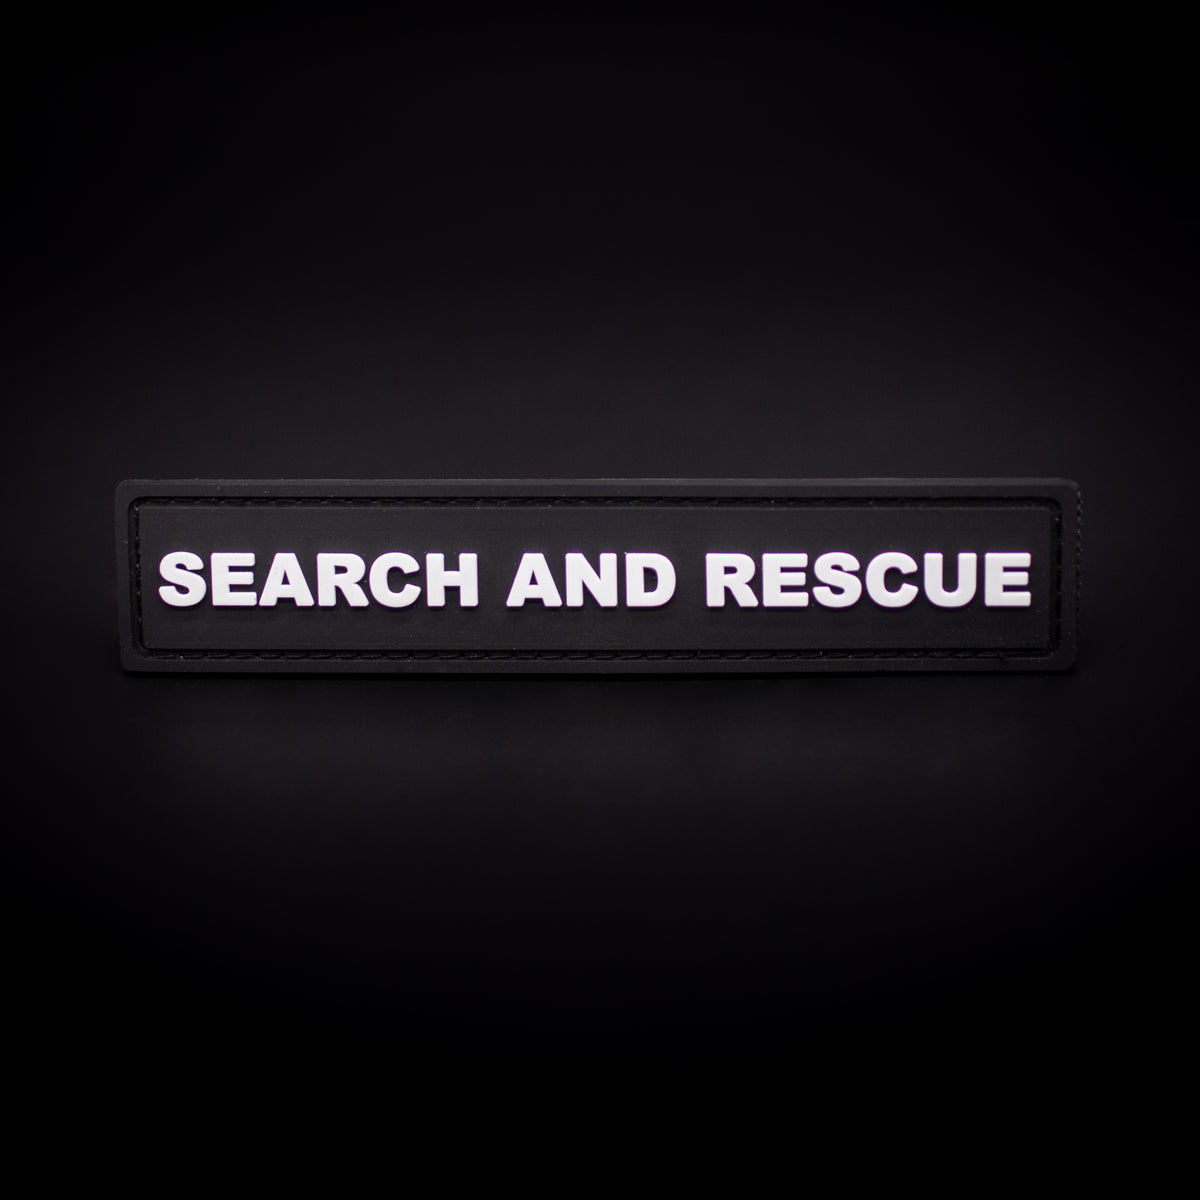 Search and Rescue Patch